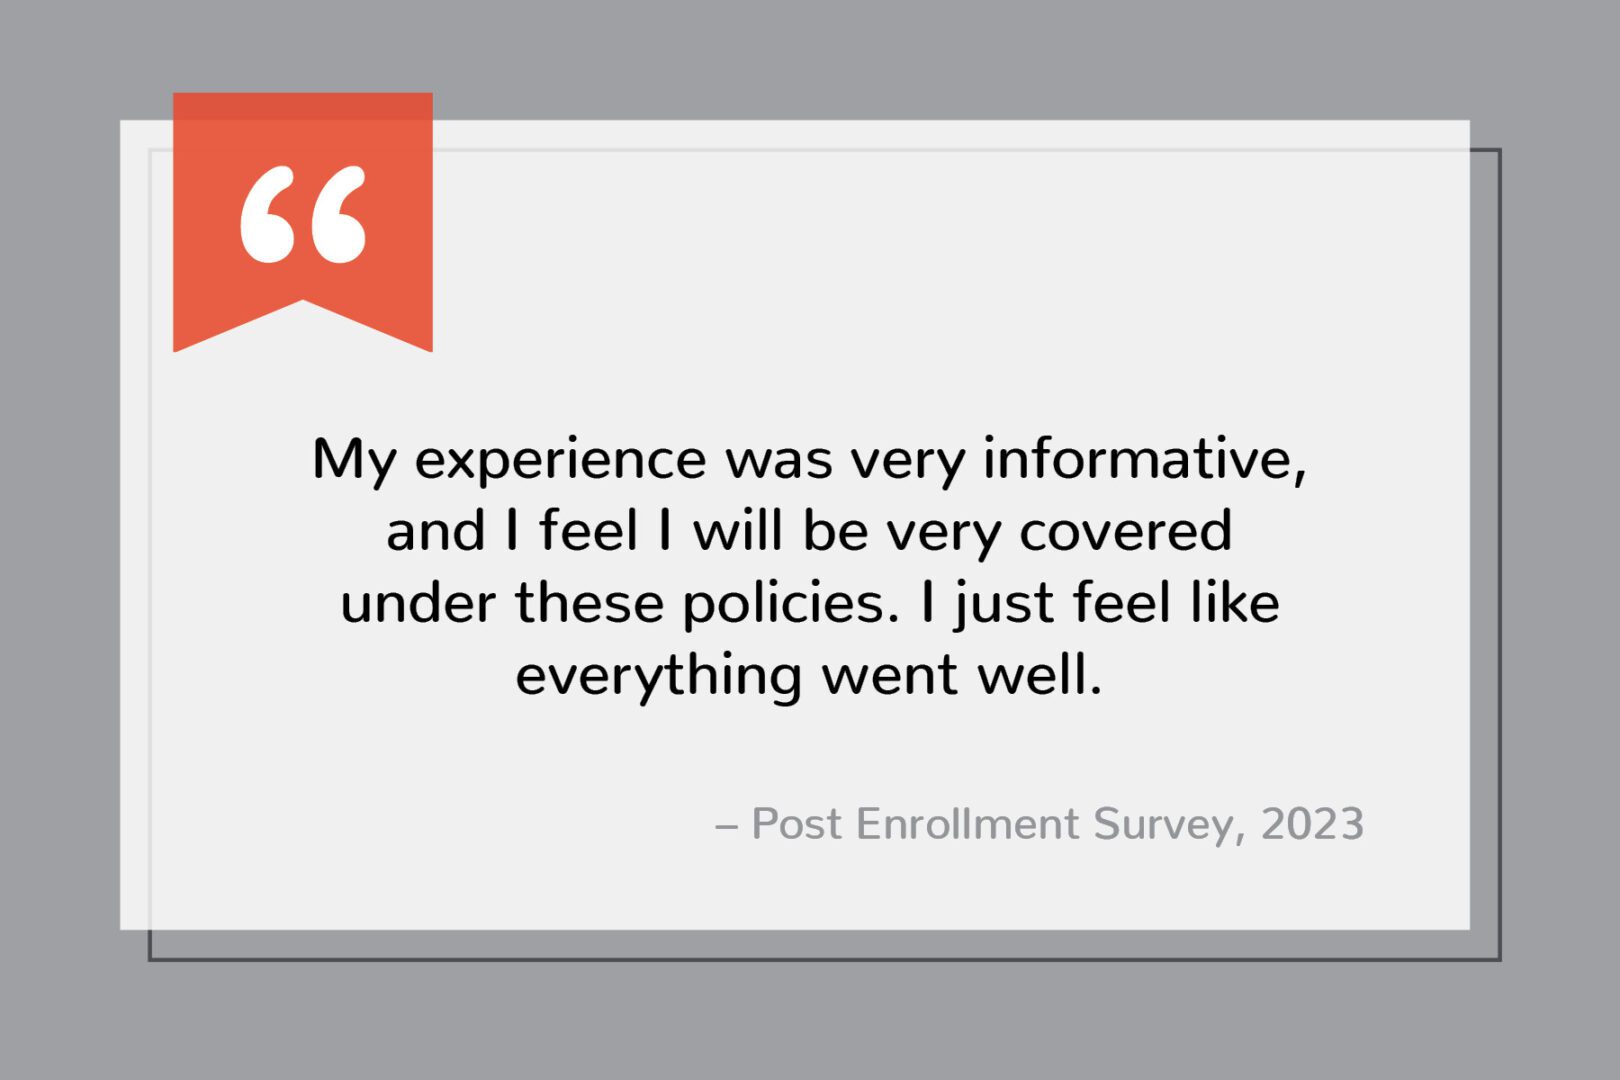 A quote from the post enrollment survey.